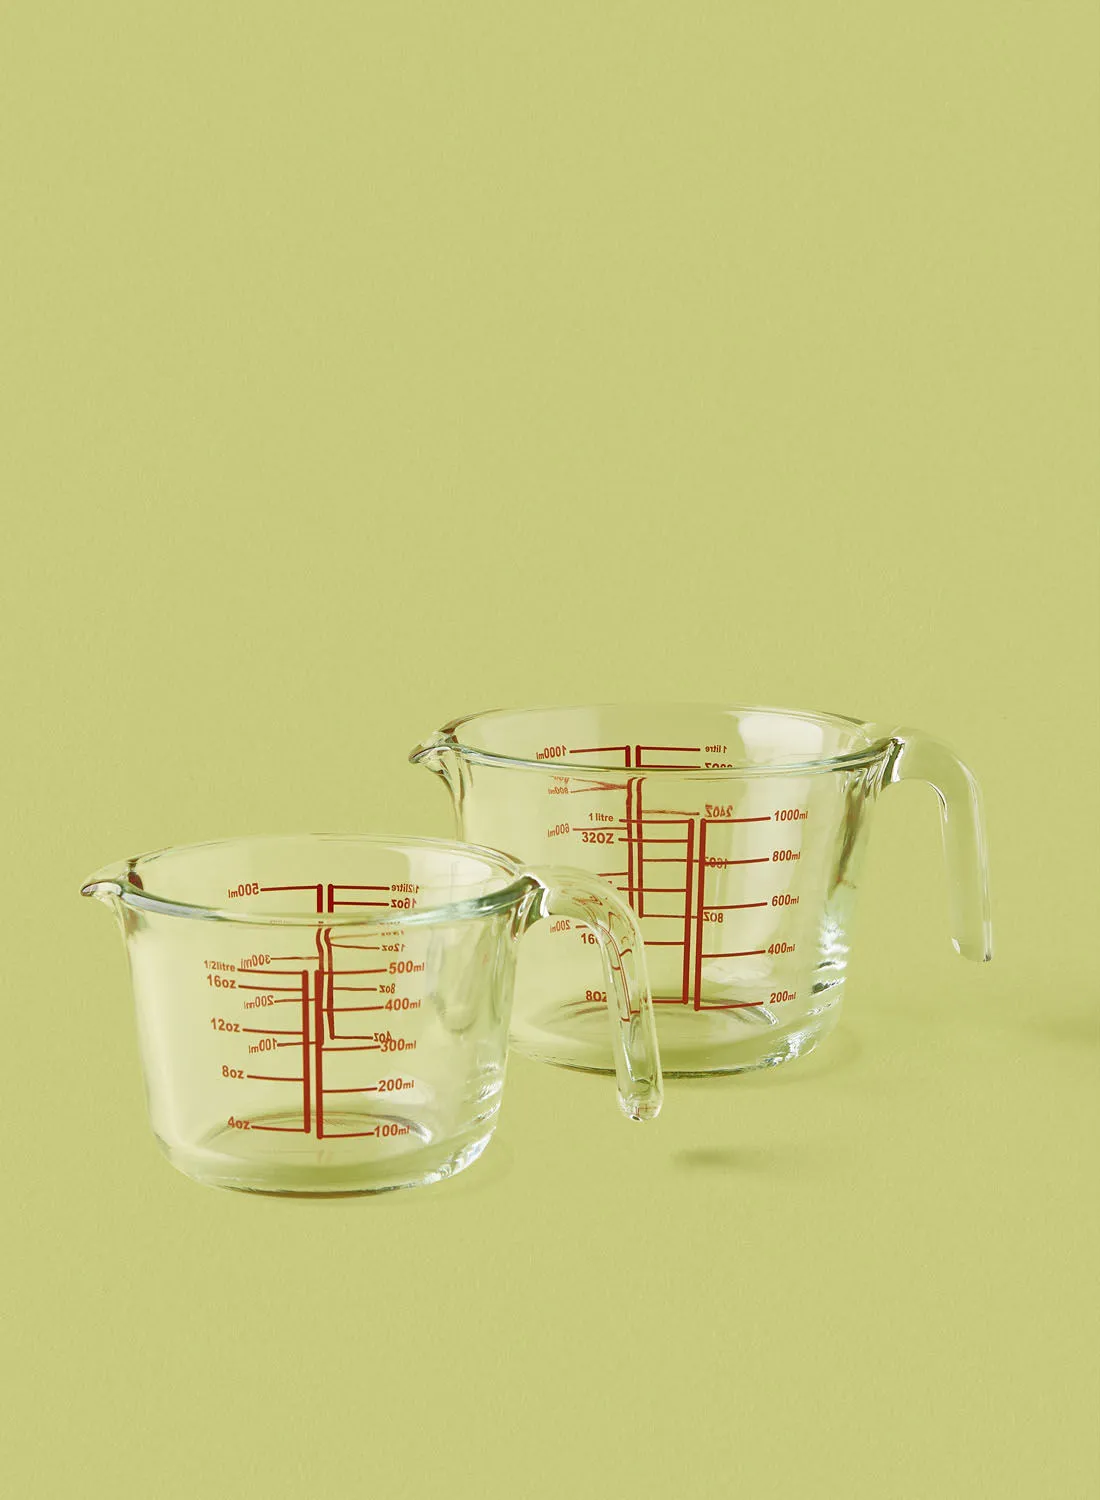 noon east 2 Piece Glass Measuring Cups - Heat Resistant - Oven Safe - Standard Cups - Kitchen Accessories - Mixing Bowl - Clear